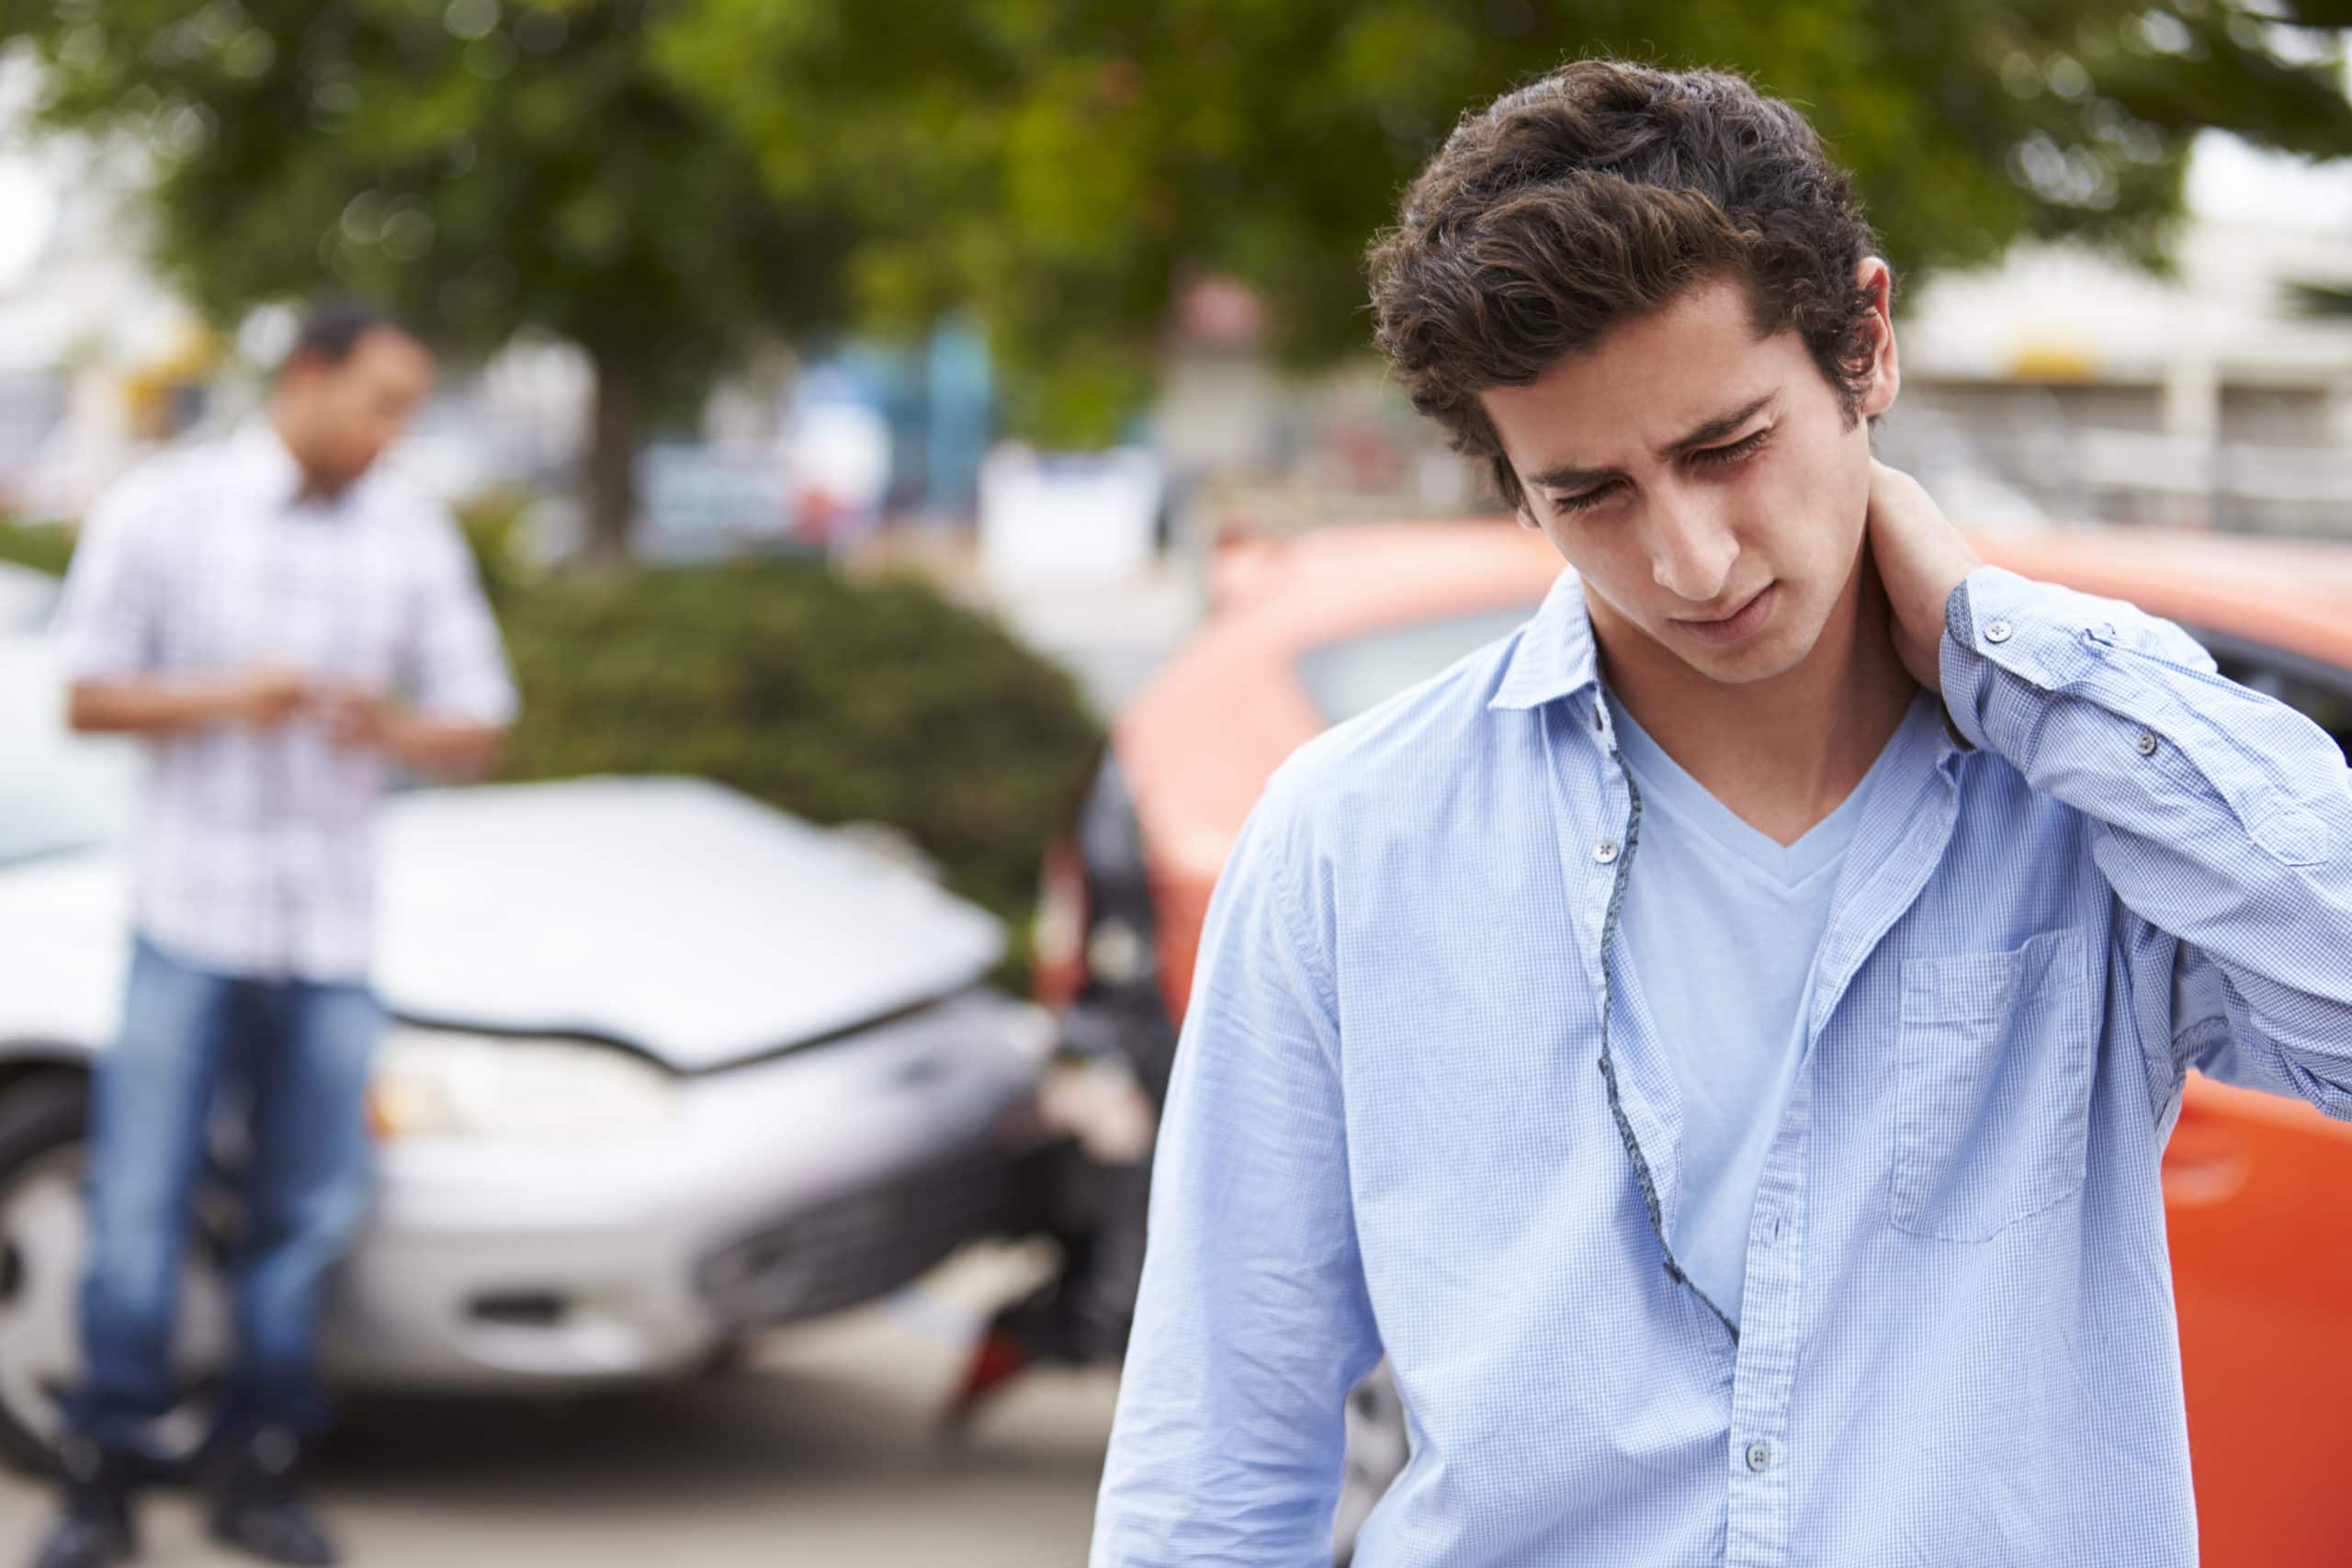 Chiropractic Treatments For Whiplash: What Are Your Options?